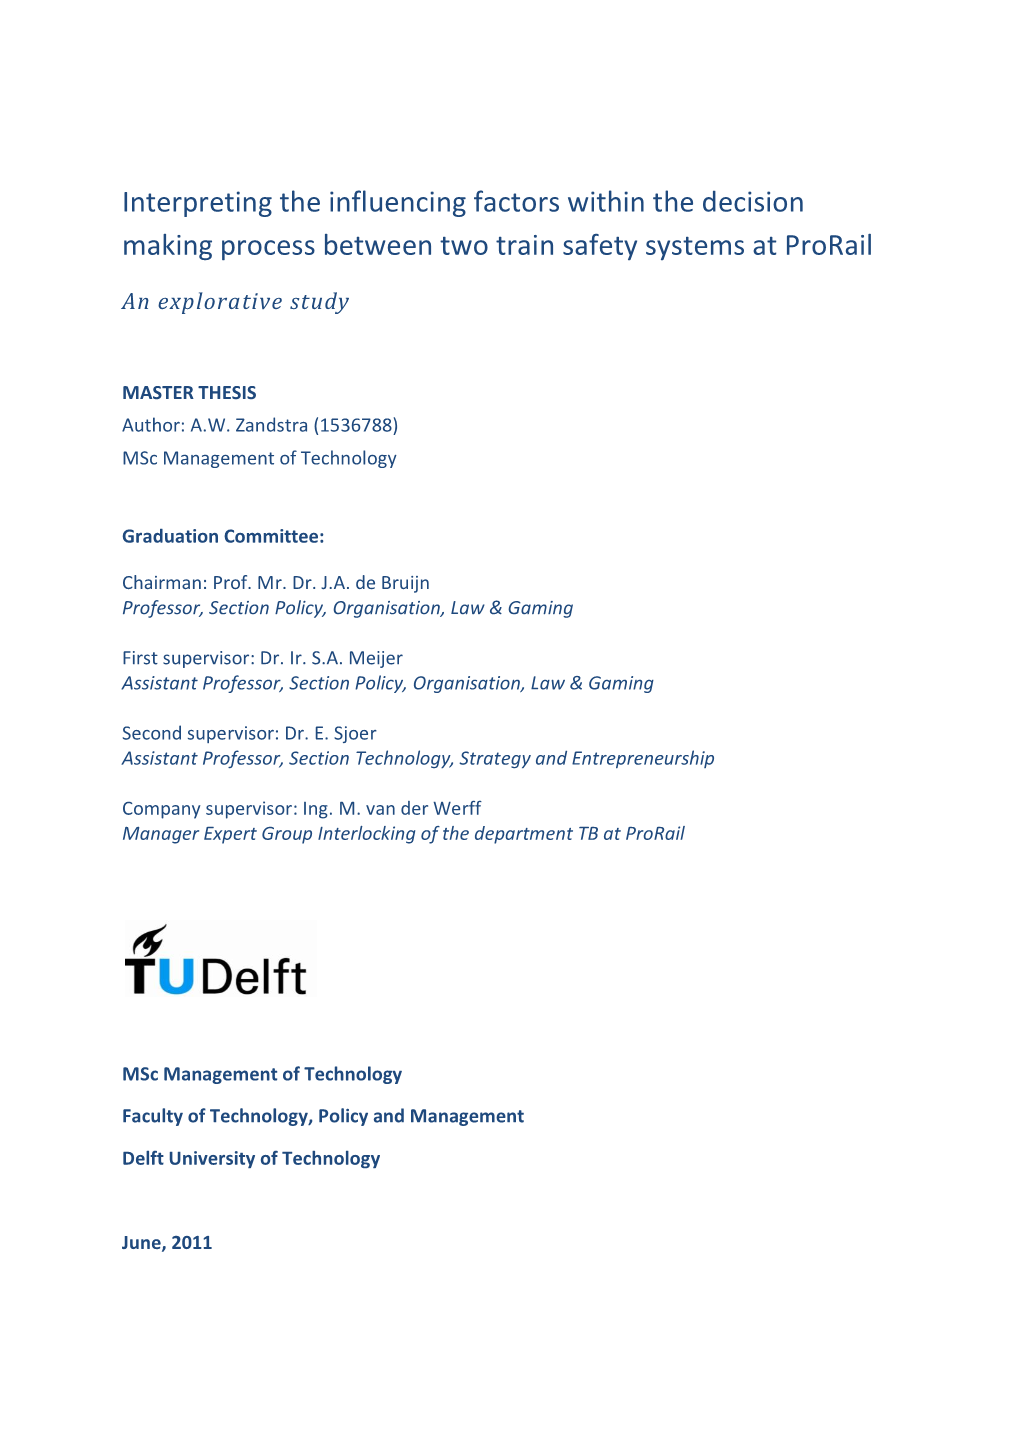 Interpreting the Influencing Factors Within the Decision Making Process Between Two Train Safety Systems at Prorail